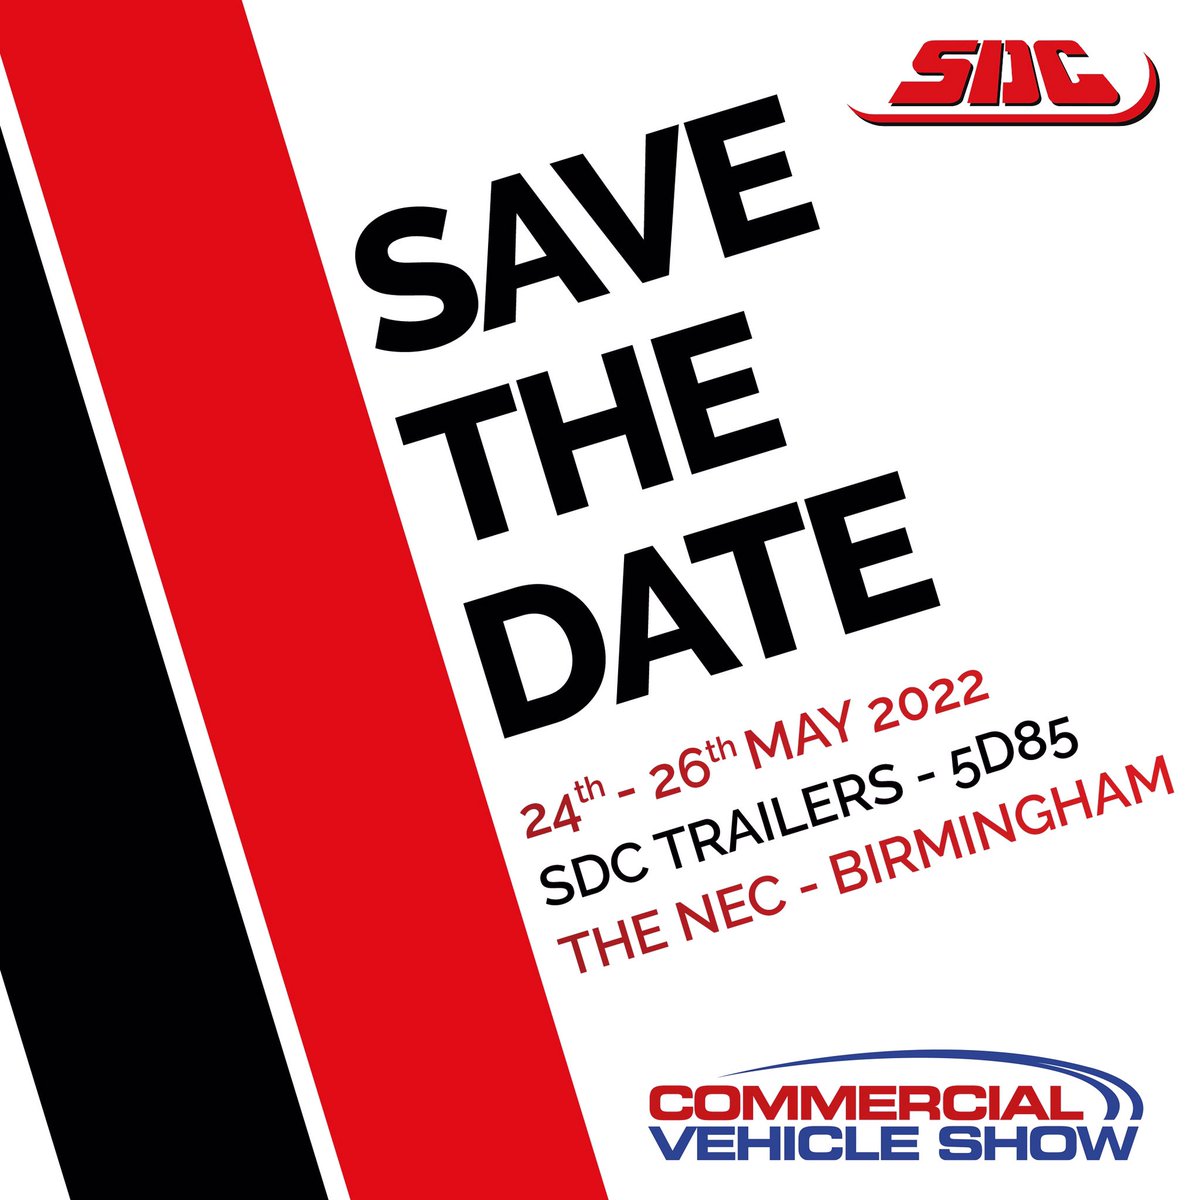 We’re excited to announce SDC is exhibiting at the Commercial Vehicle Show in Birmingham and we hope you can join us!

📅 24th – 26th May 2022
📍 The NEC
🏢 Hall 5, Stand 5D85 
#savethedate #cvshow2022 #commercialvehicleshow #forallyourlogisticsrequirements